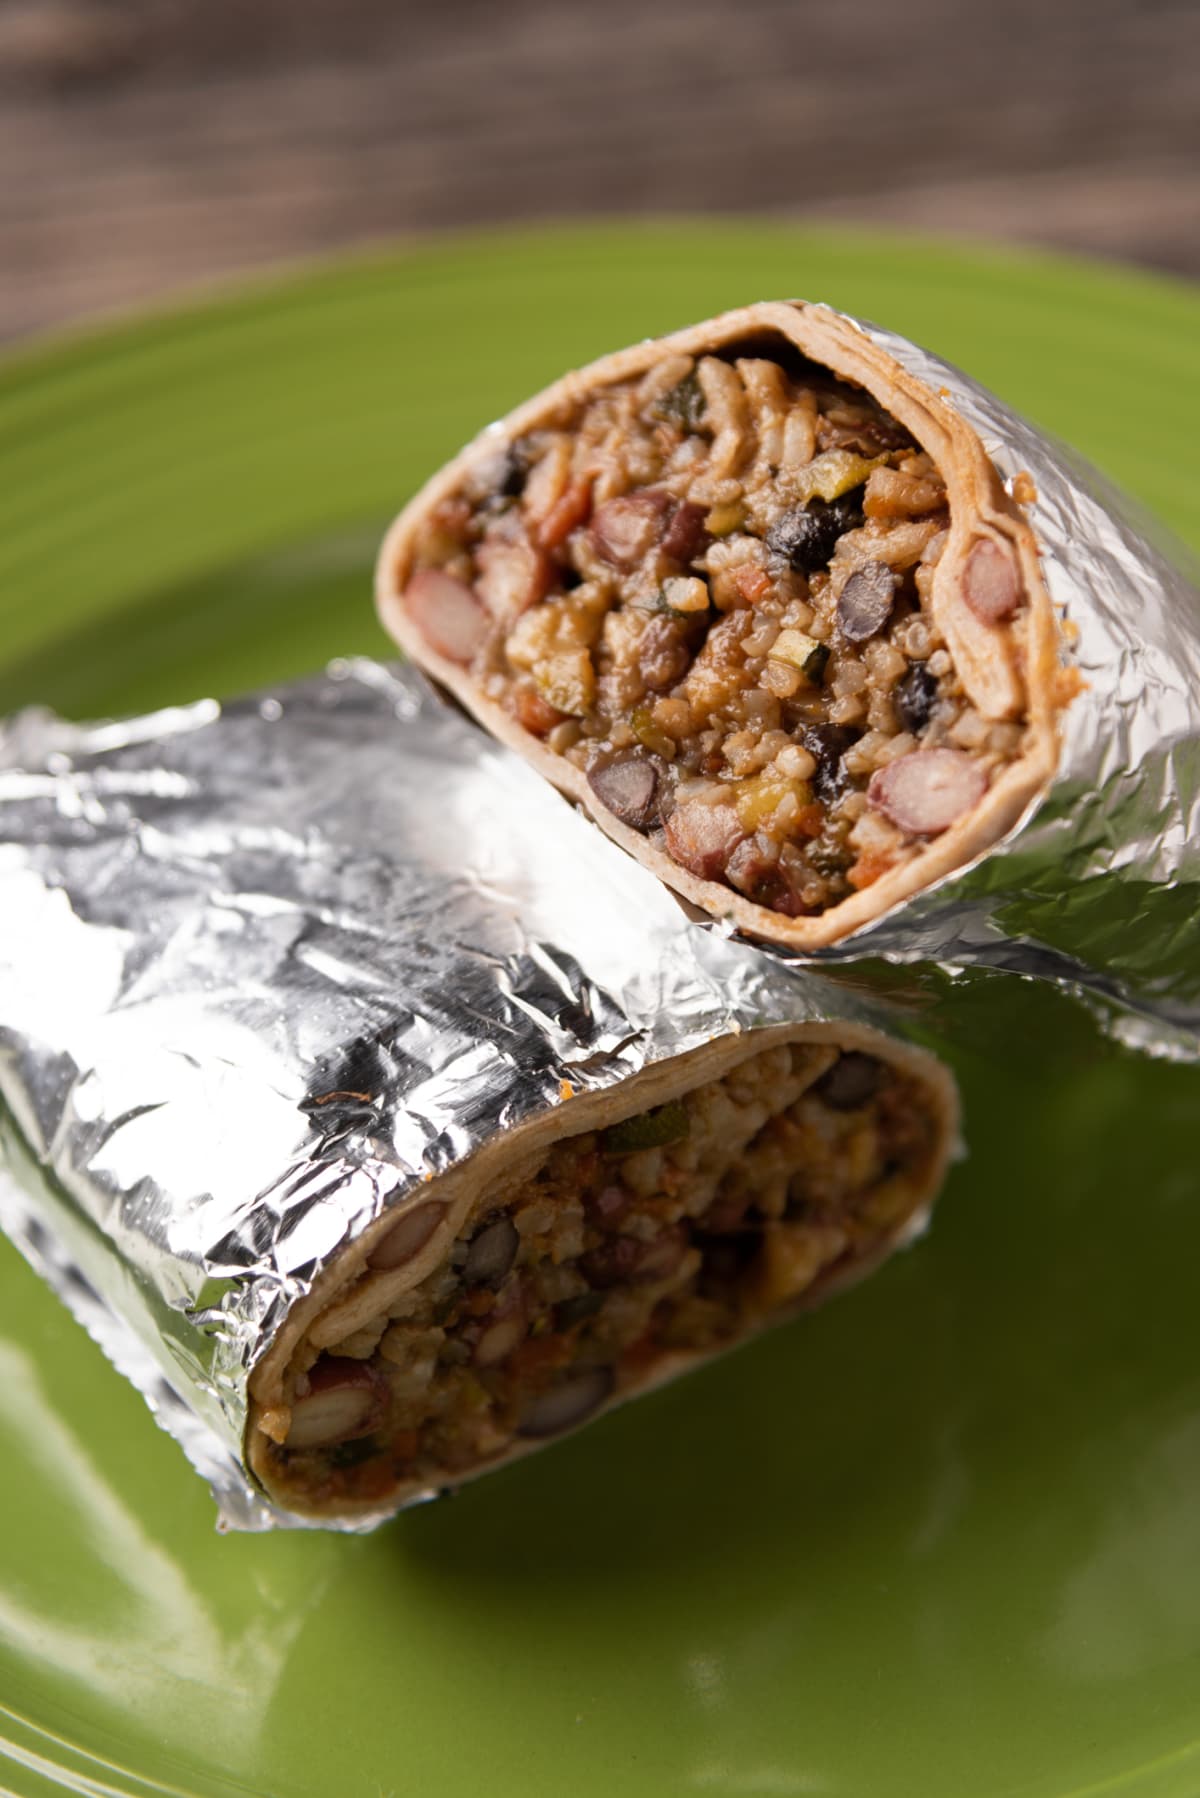 Mexican burrito with side salsa wrapped in foil.